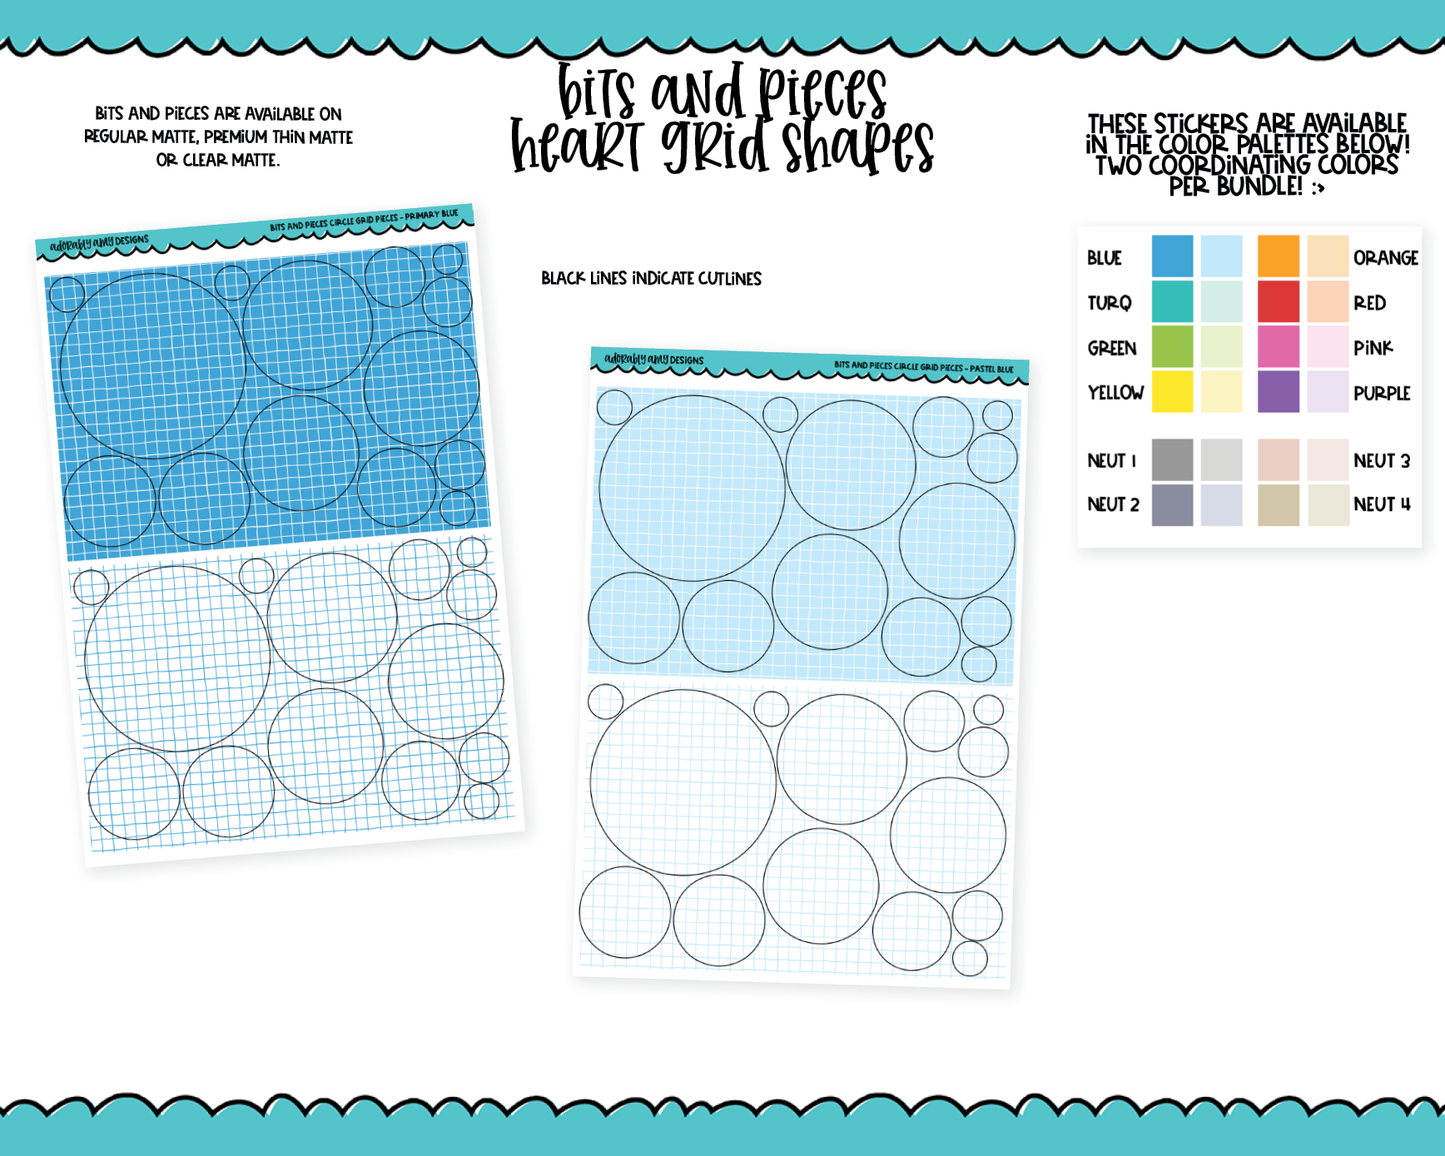 Bits & Pieces Circle Grid Shapes Kit Addons for Any Planner in 13 different Color Schemes